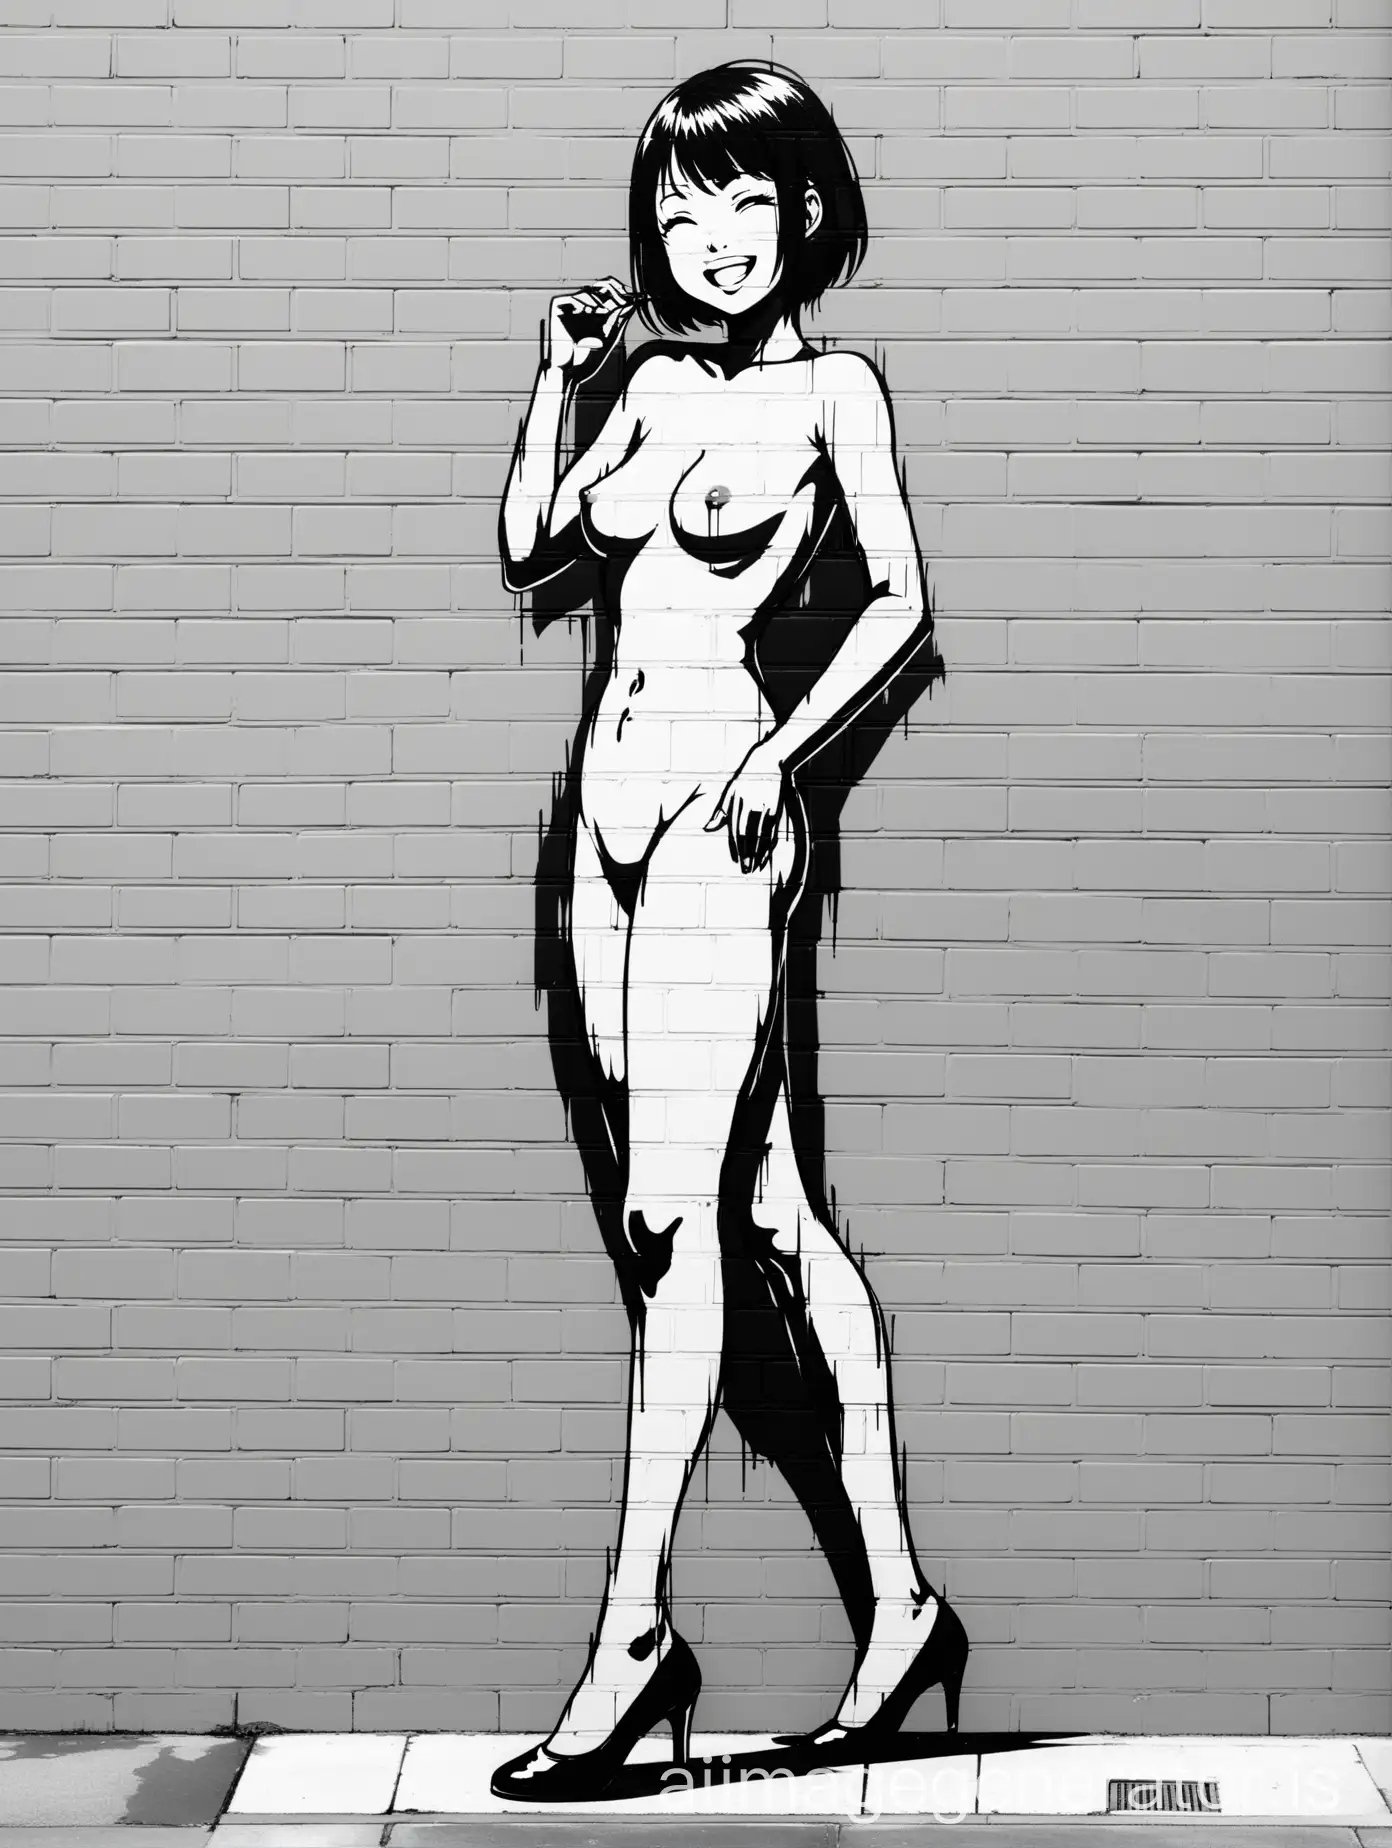 Japanese graffiti of a smiling naked Asian woman, short brown hair, on a white brick wall, painted in black and white, with black heels.